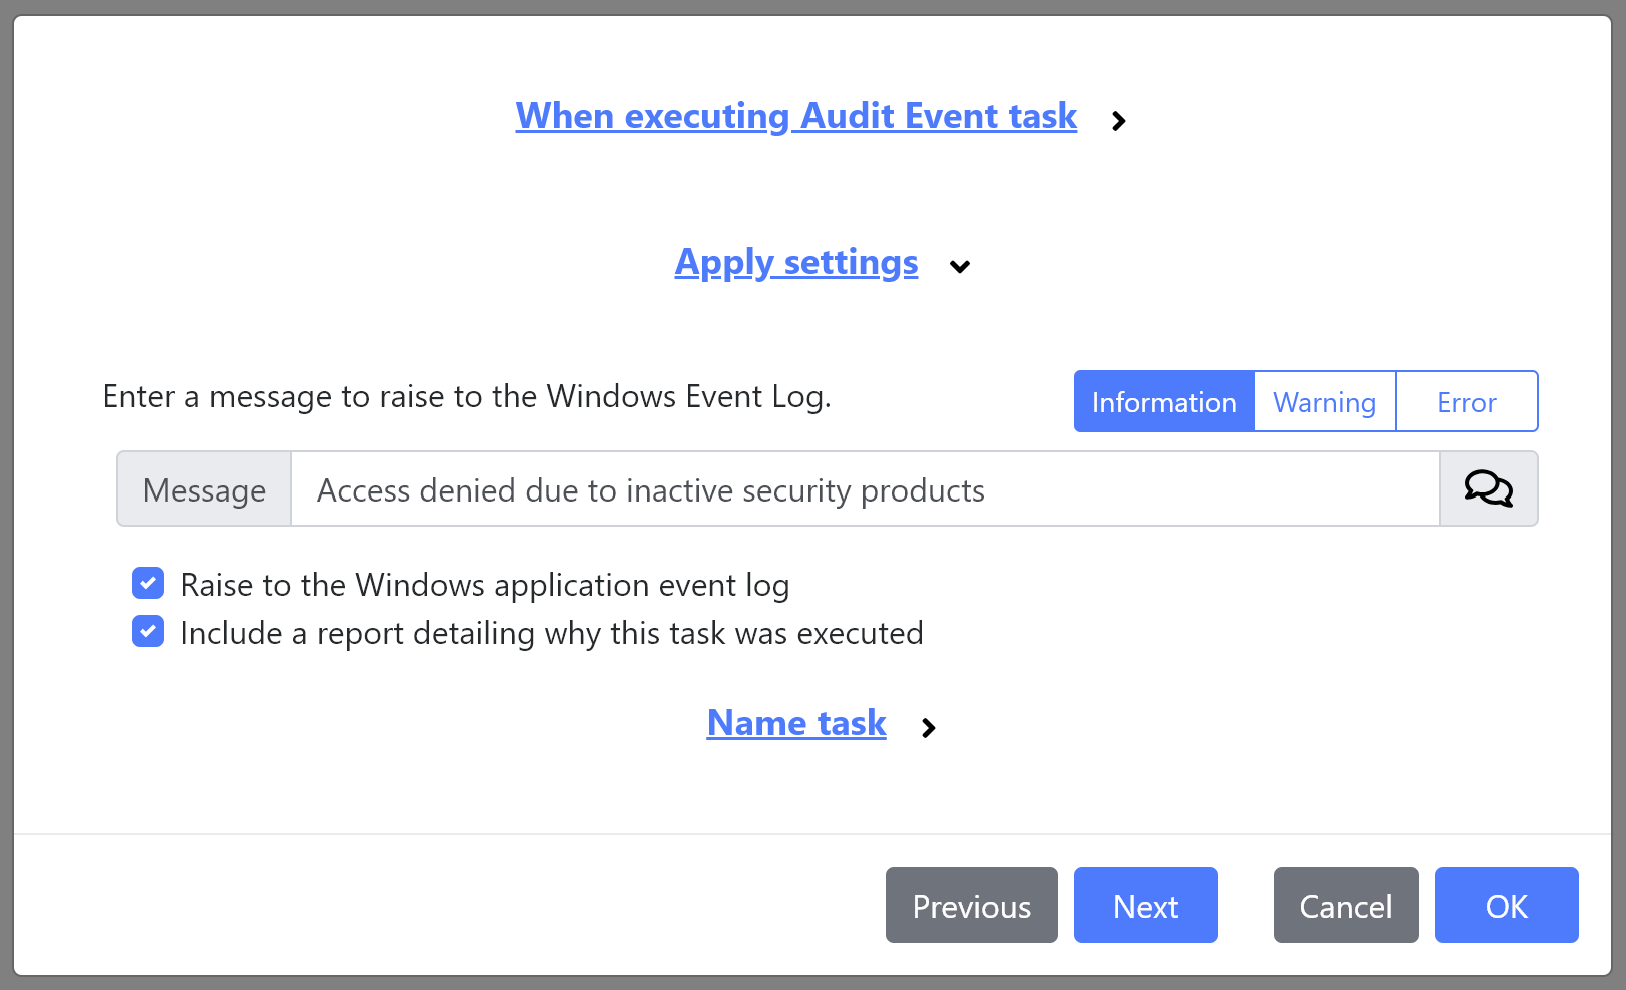 The updated Audit Event task